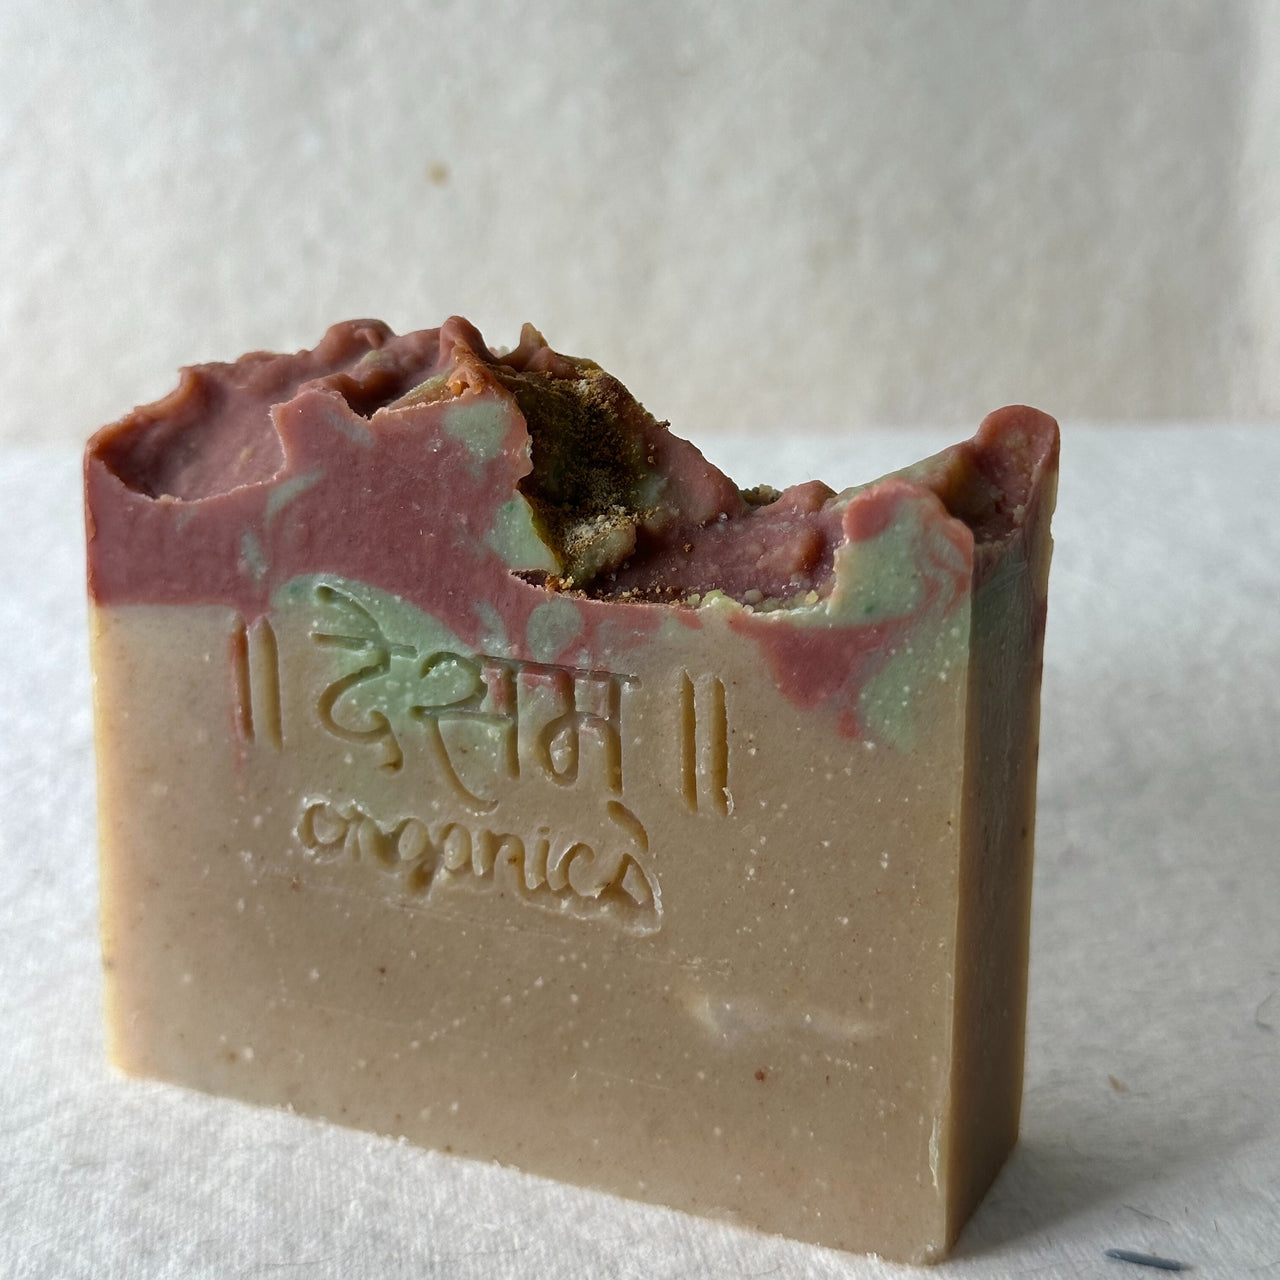 PATCHOULI AND ORANGE PEEL COLD PROCESSED HANDMADE ARTISANAL SOAP (1x110g)